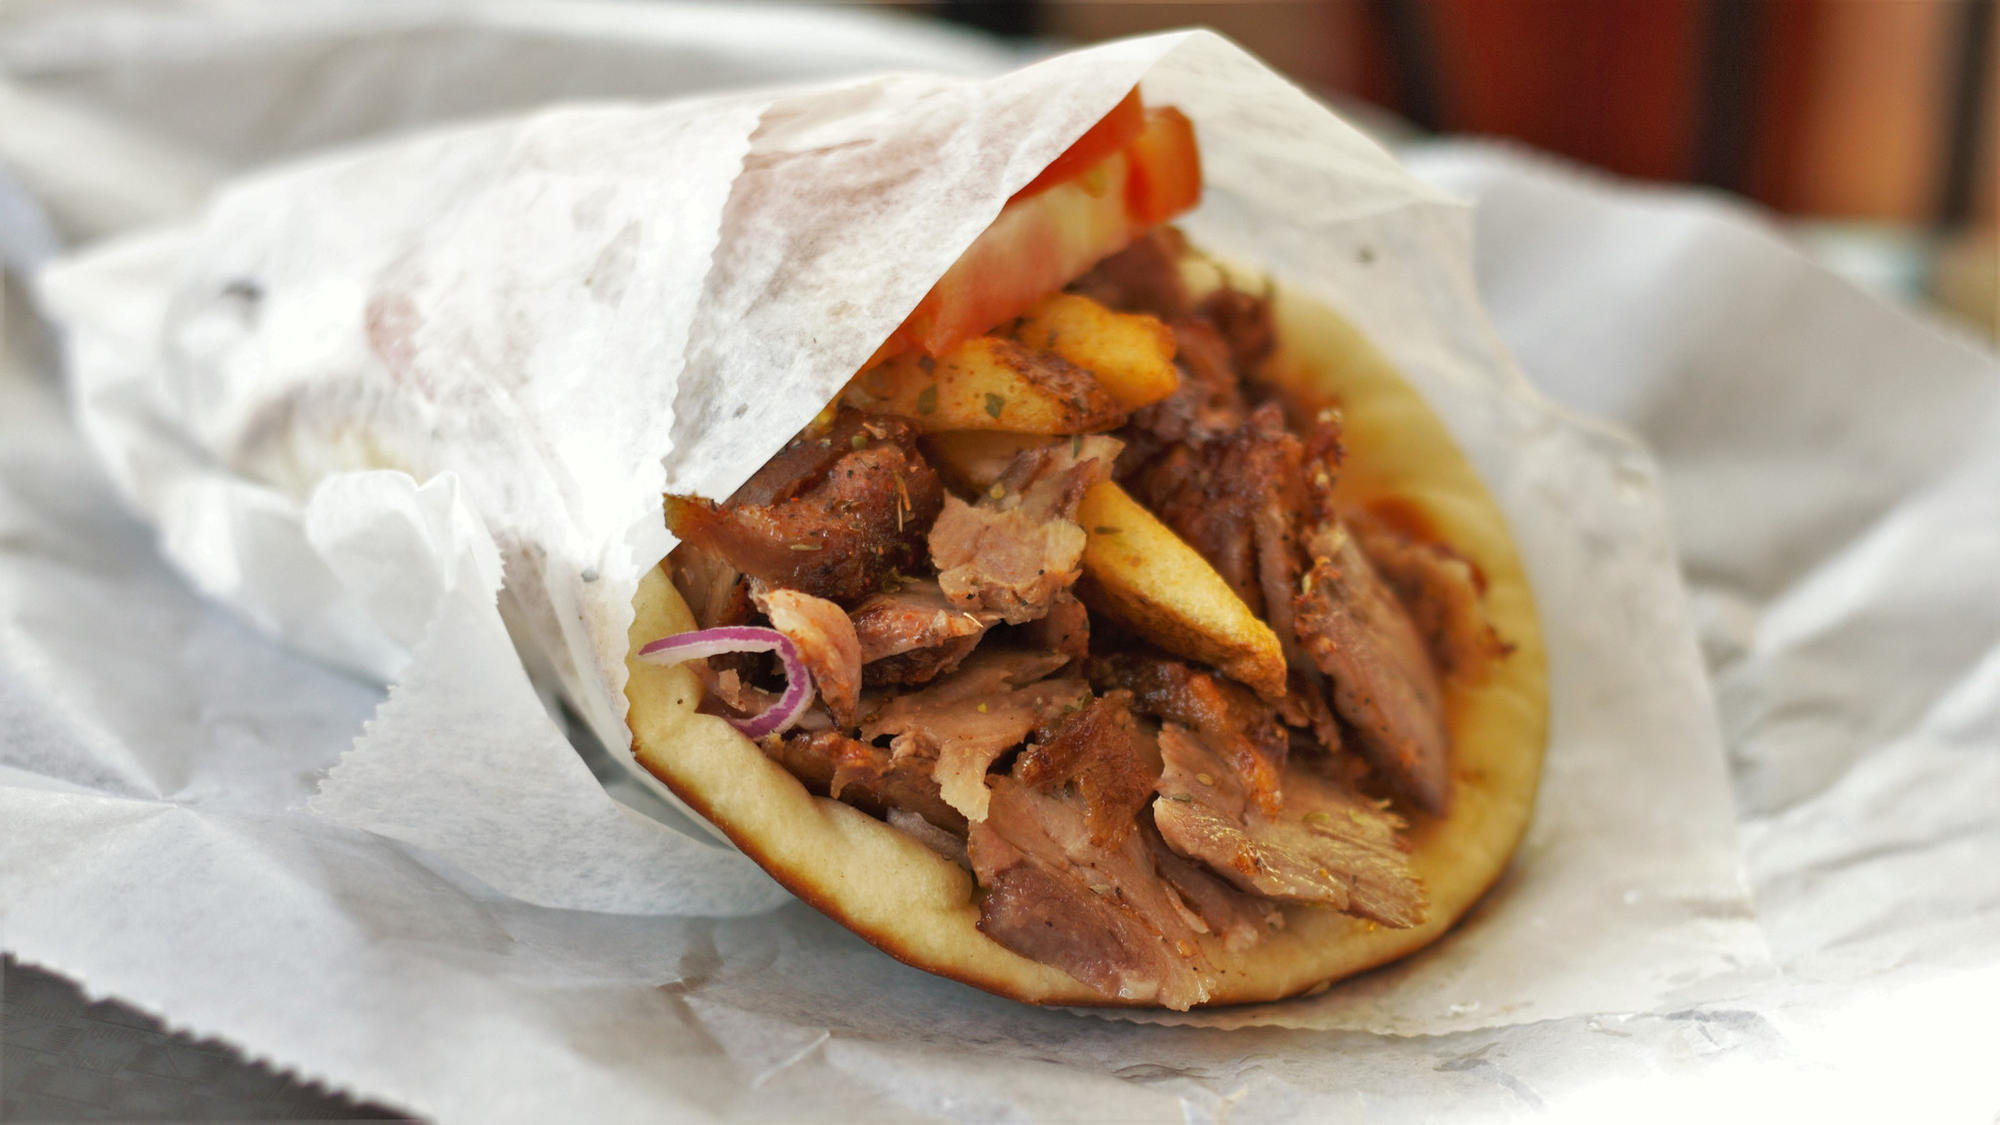 Best gyros in Chicago? Look for the pork - Chicago Tribune